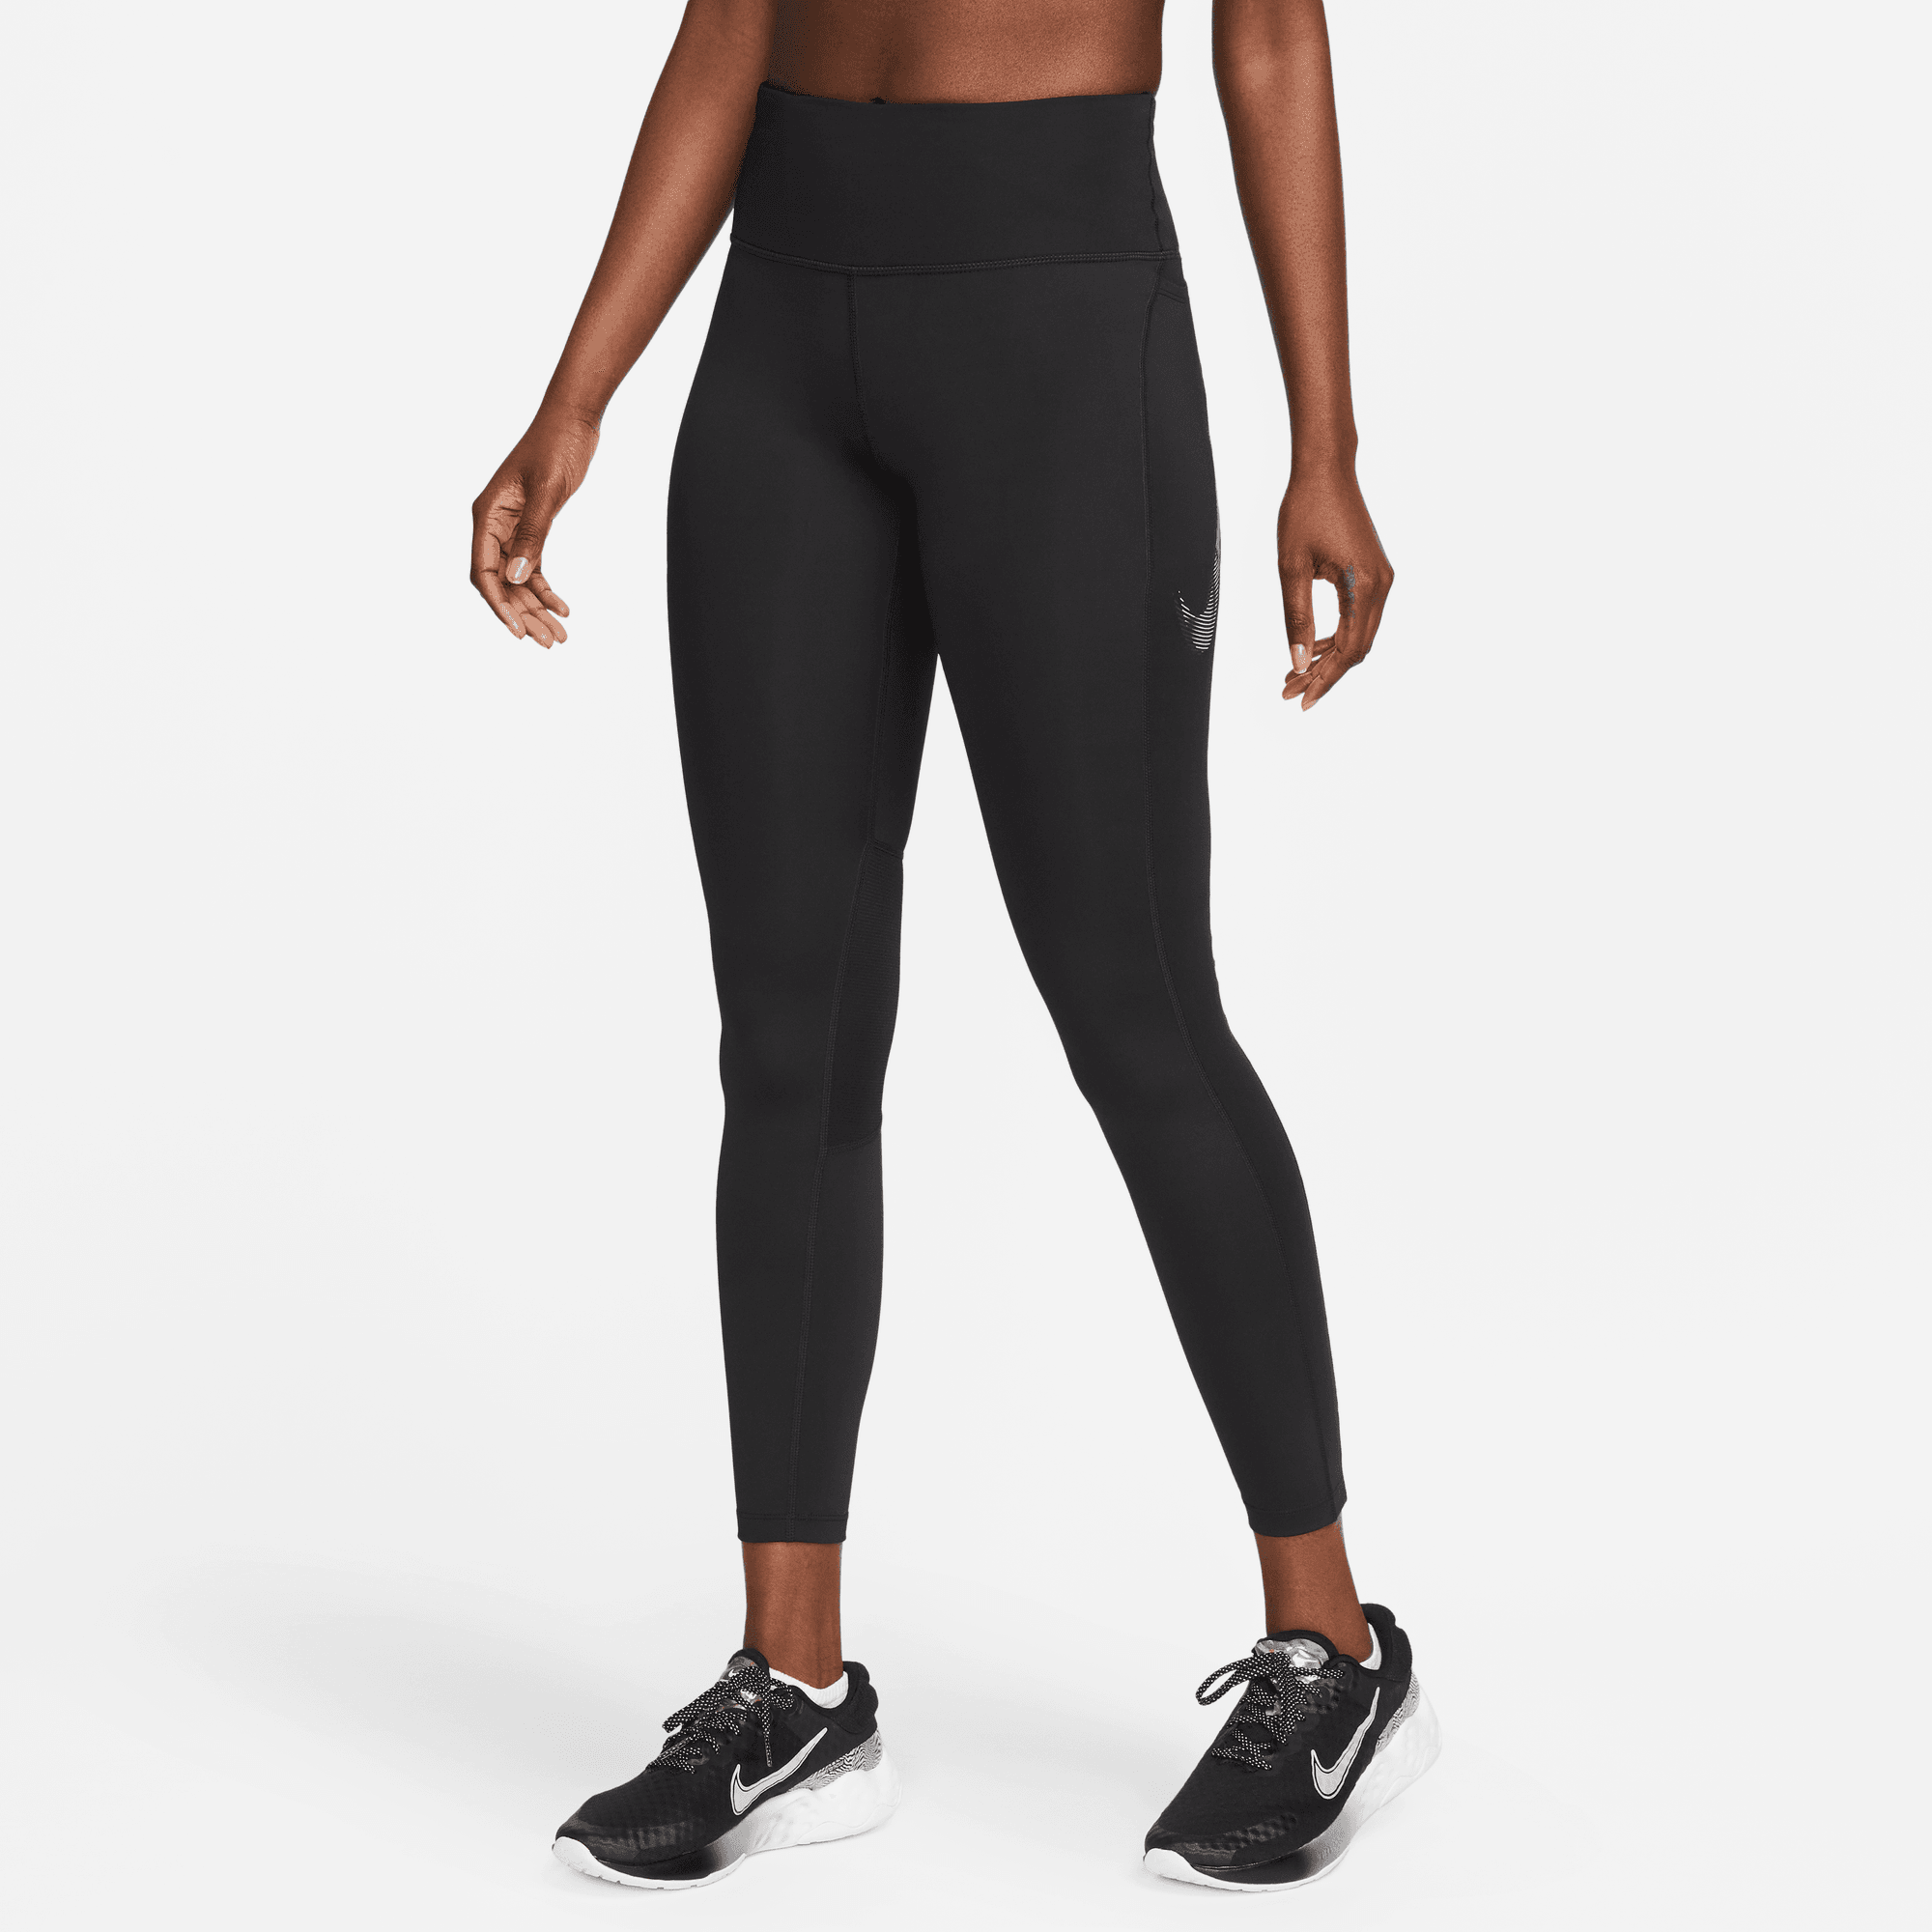 Nike Air Fast Mid-Rise 7/8 Running Leggings with Pockets 'Black